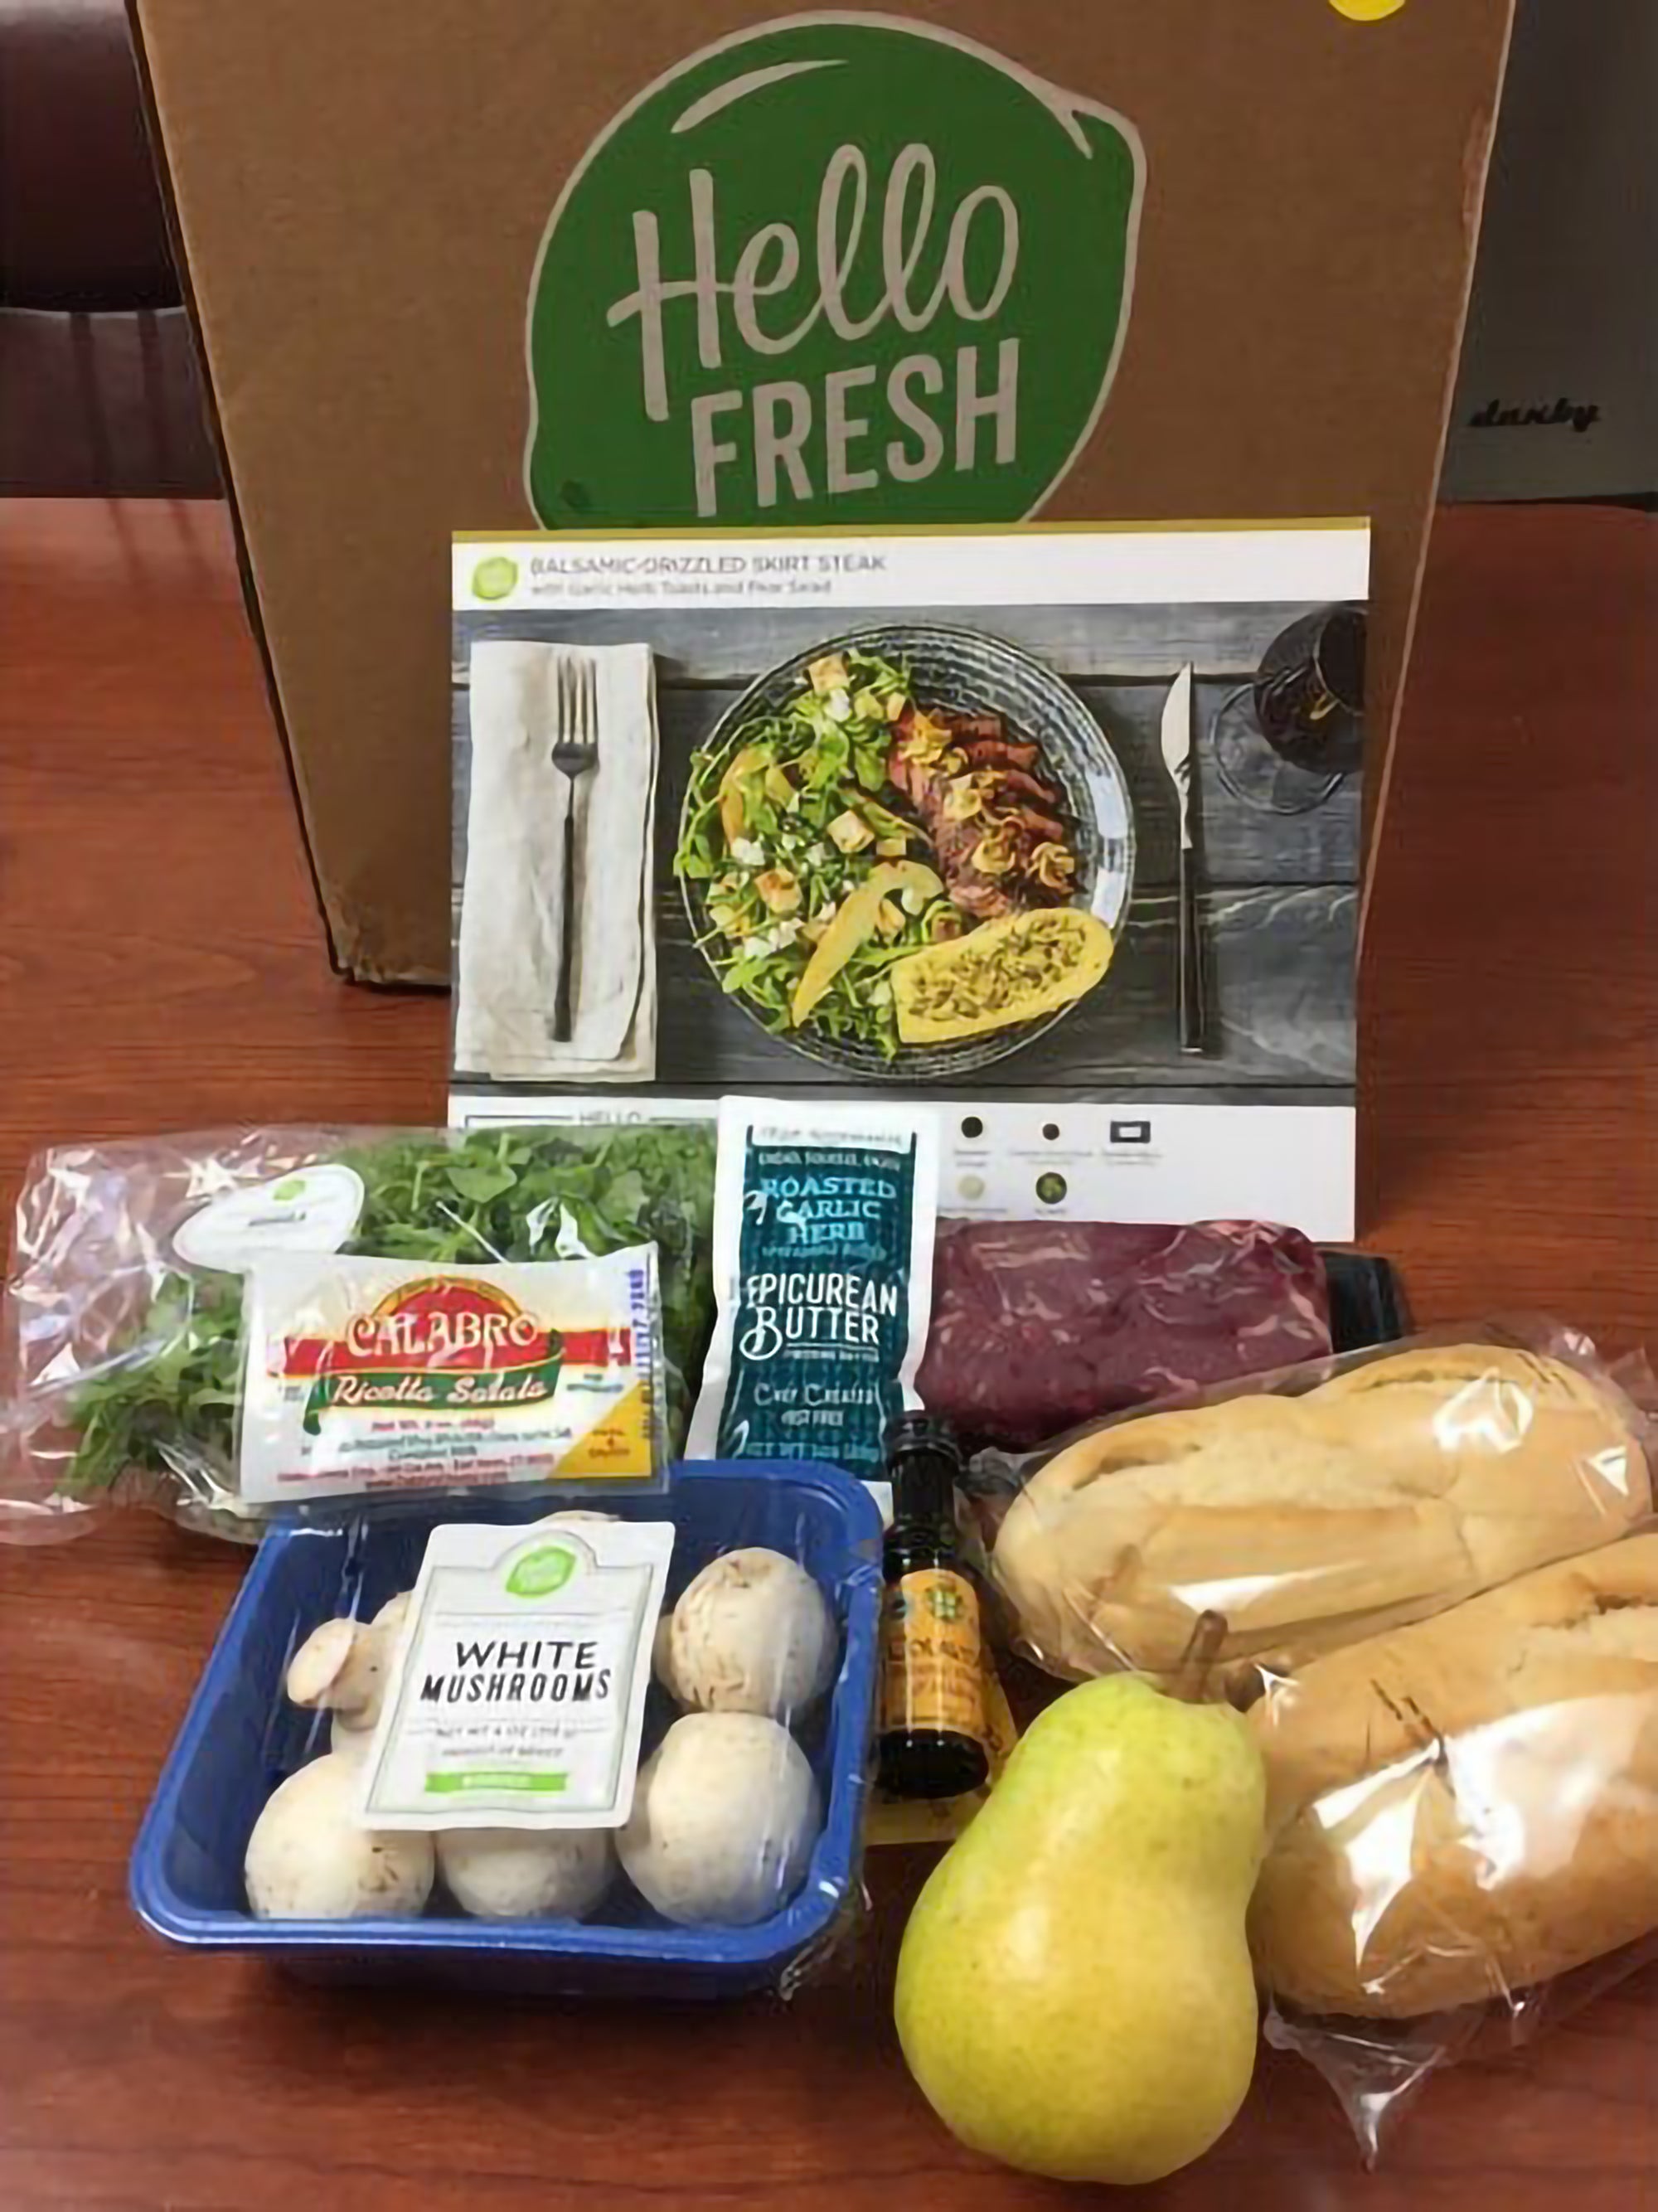 Epicurean Butter packet in a HelloFresh meal kit